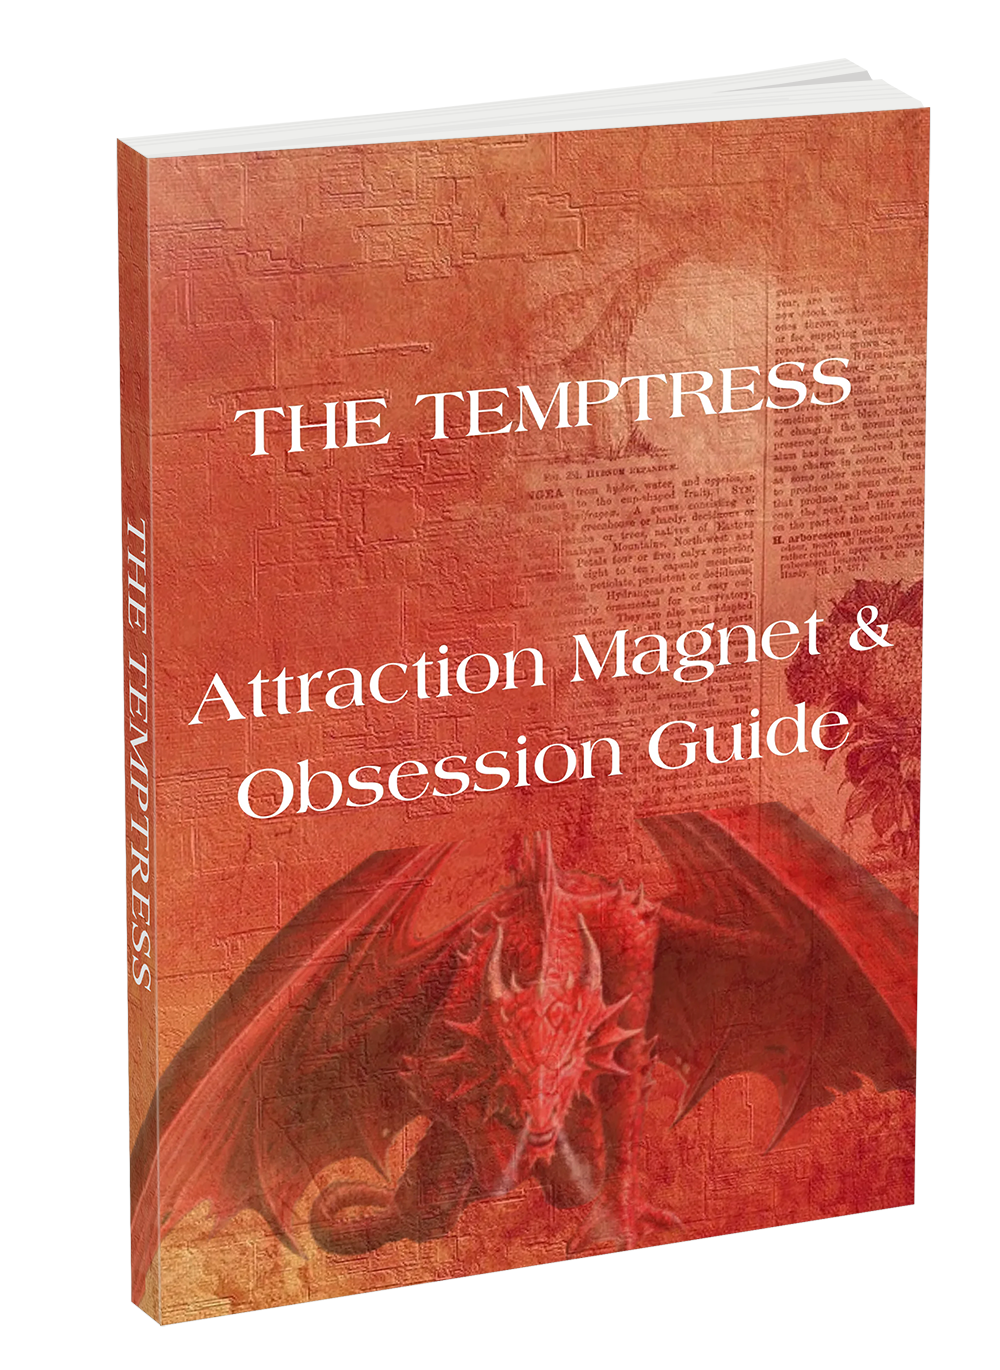 THE TEMPTRESS; Attraction Magnet & Obsession Guide